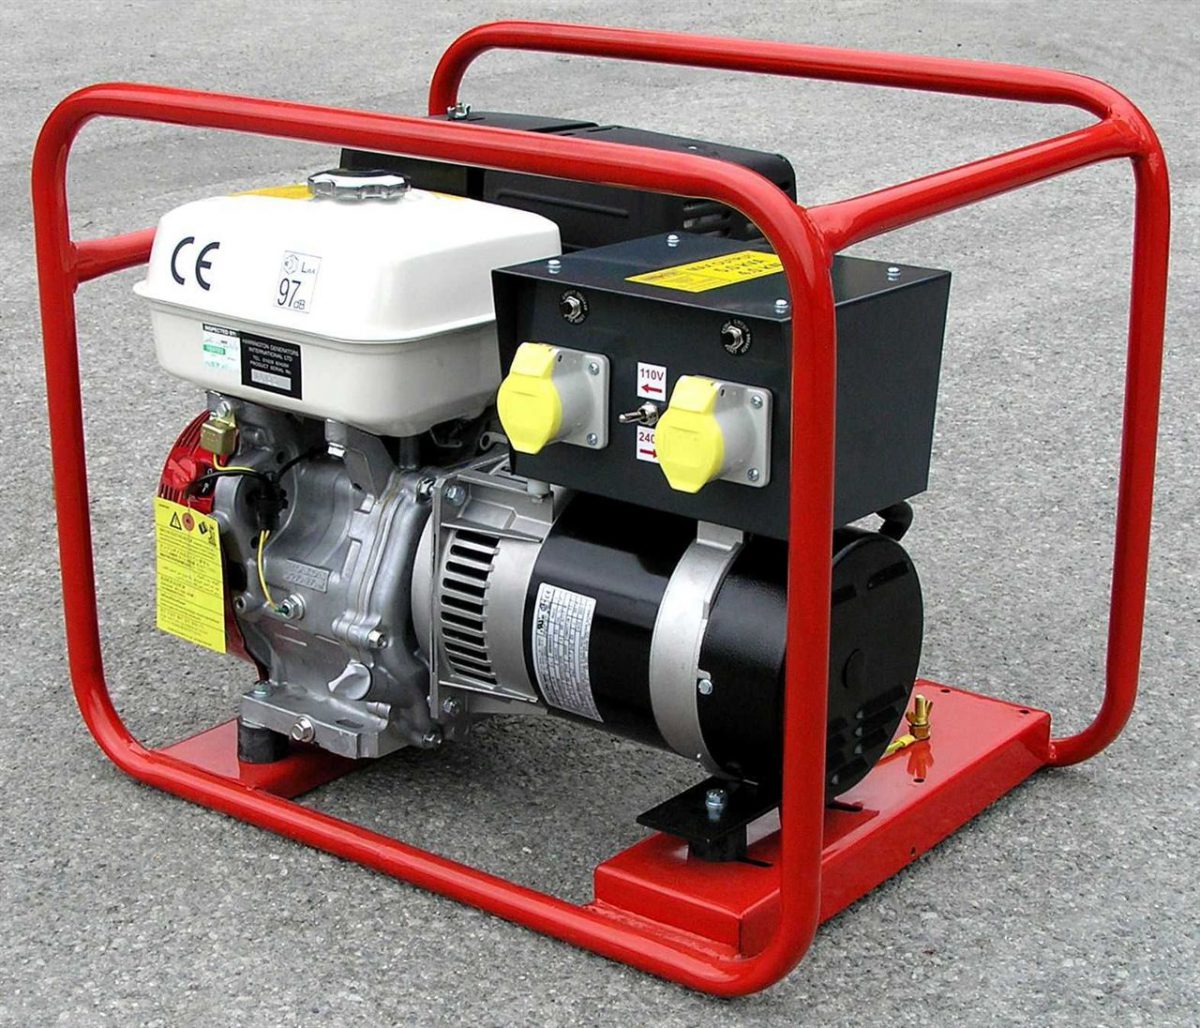 Powerful 8.1 KVA Sine Wave Petrol Generator Now Available for Purchase